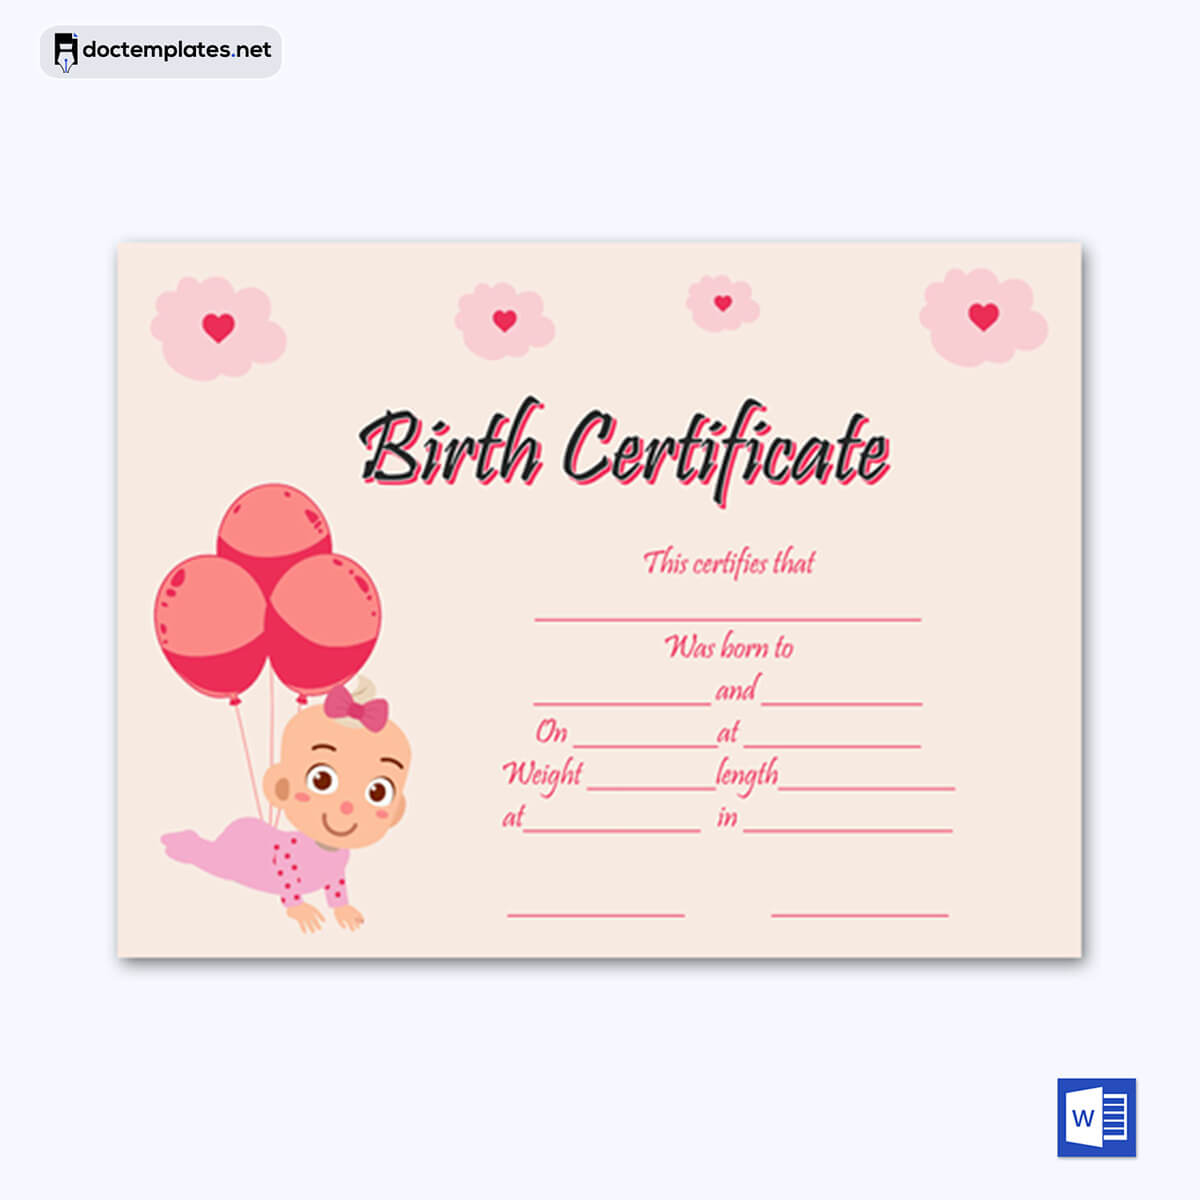 Image of Free birth certificate template
Free birth certificate template 06